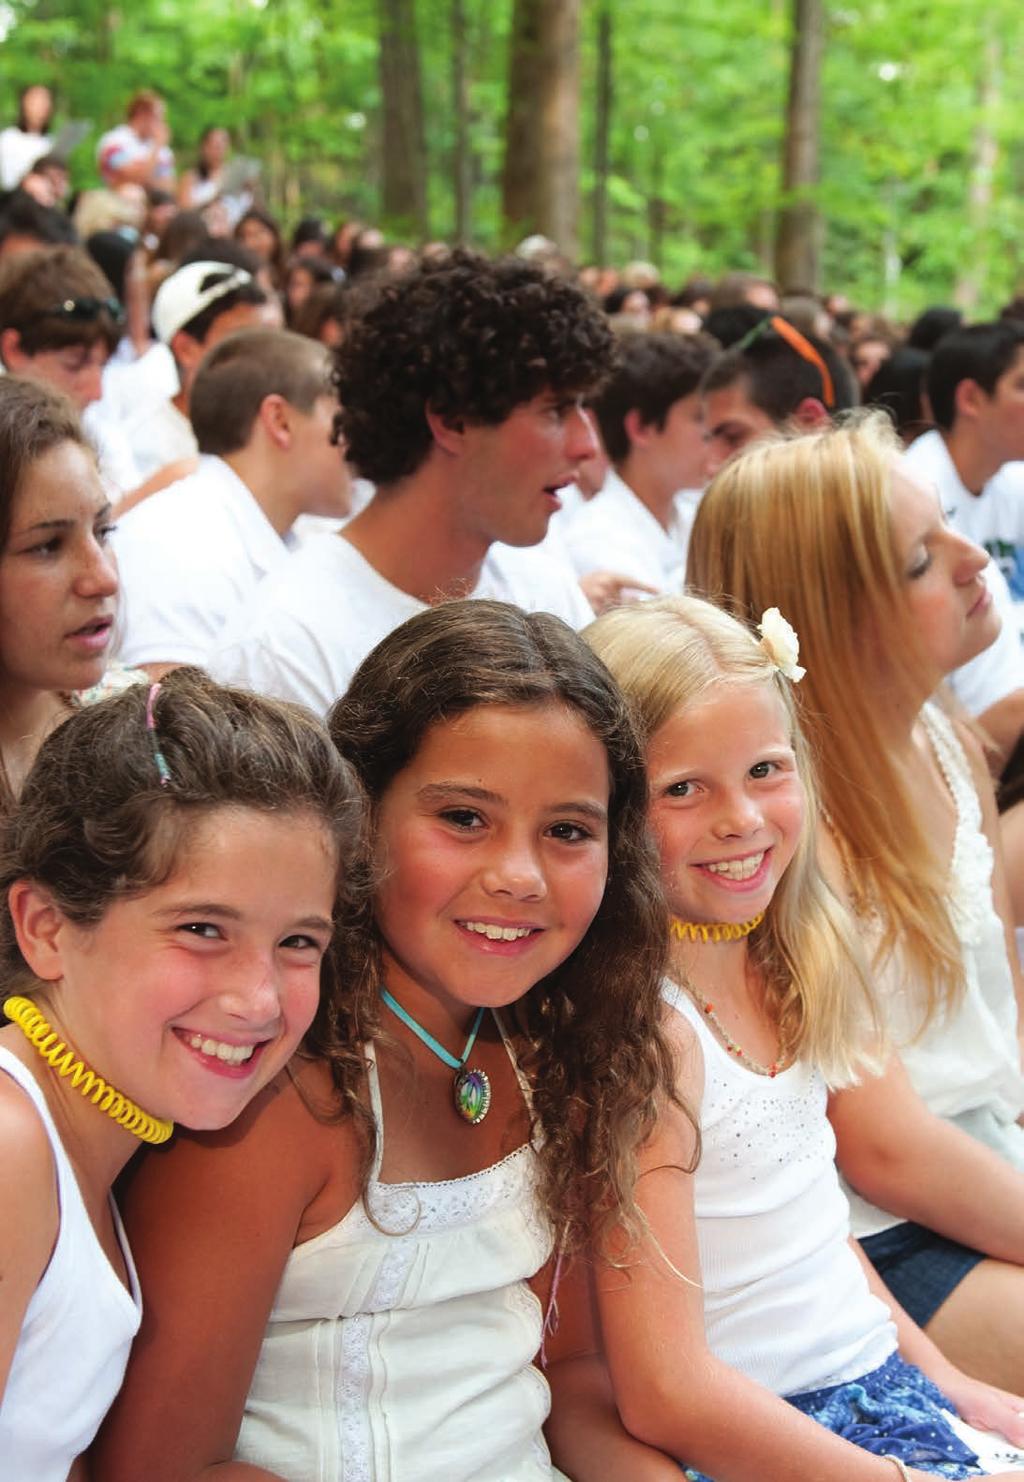 Jewish experiences, especially at an early age create a sense of excitement and Jewish pride.